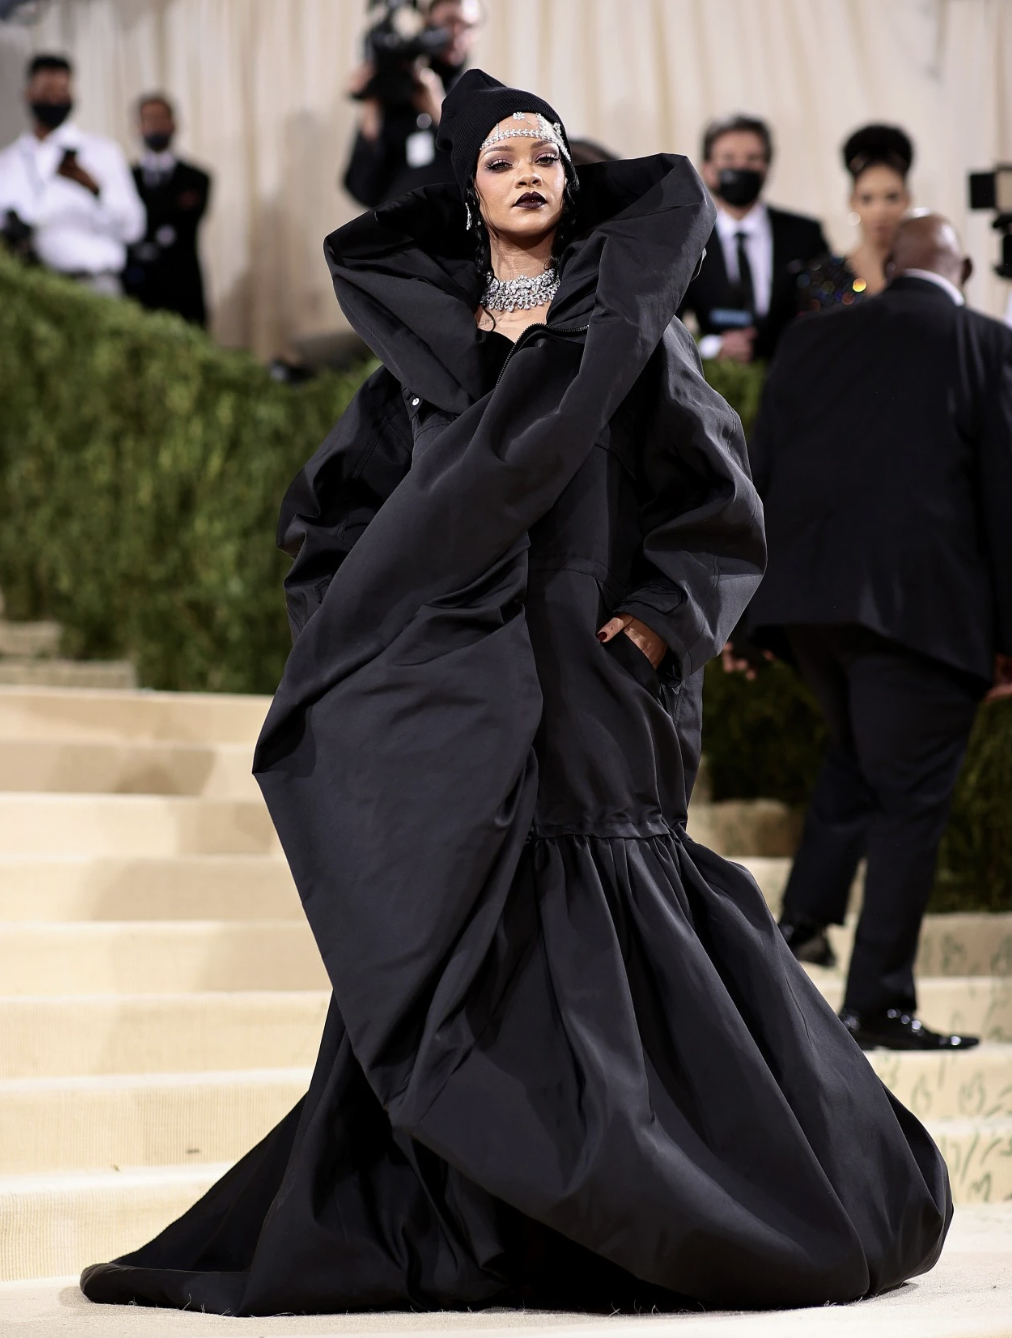 The Book Studying Rihanna's Look at the Met Gala